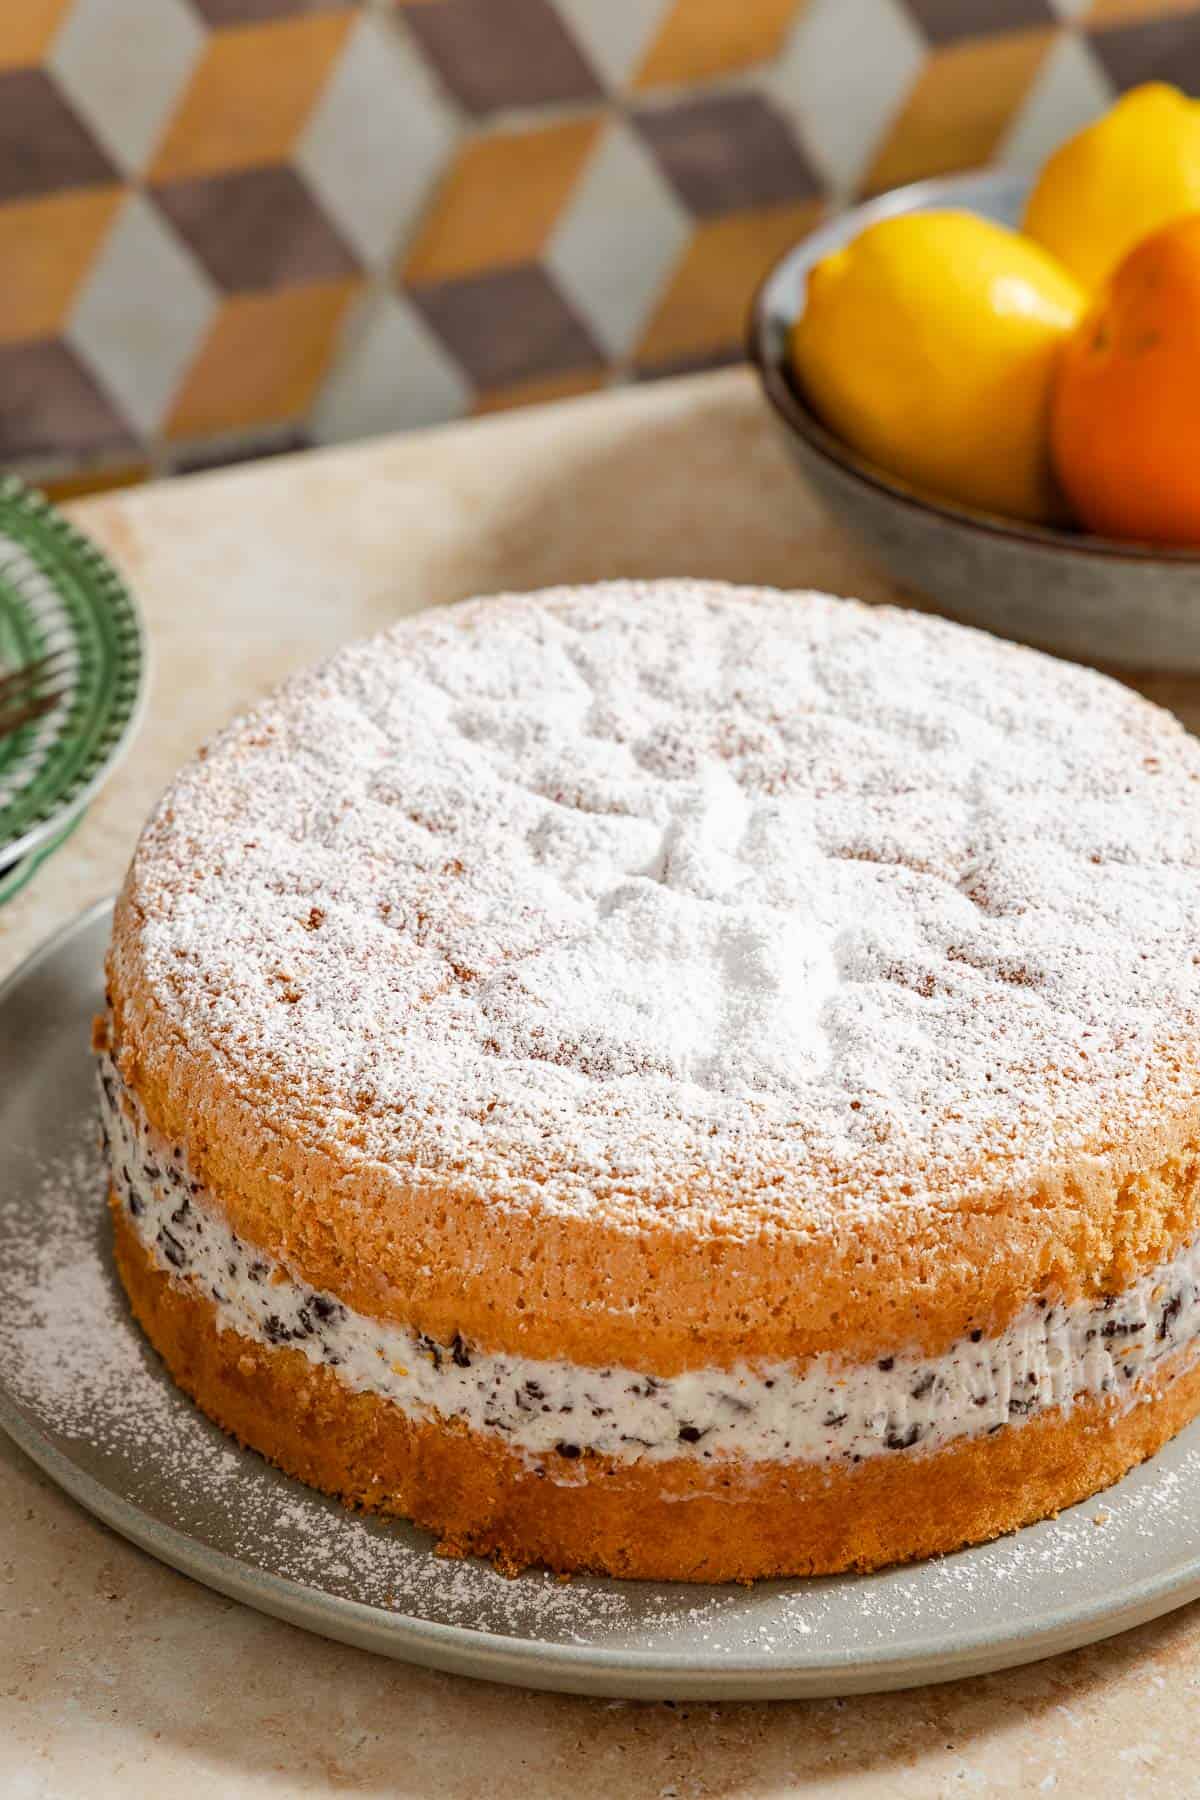 The easy cassata cake on a serving platter, with a bowl of lemons and oranges in the background.